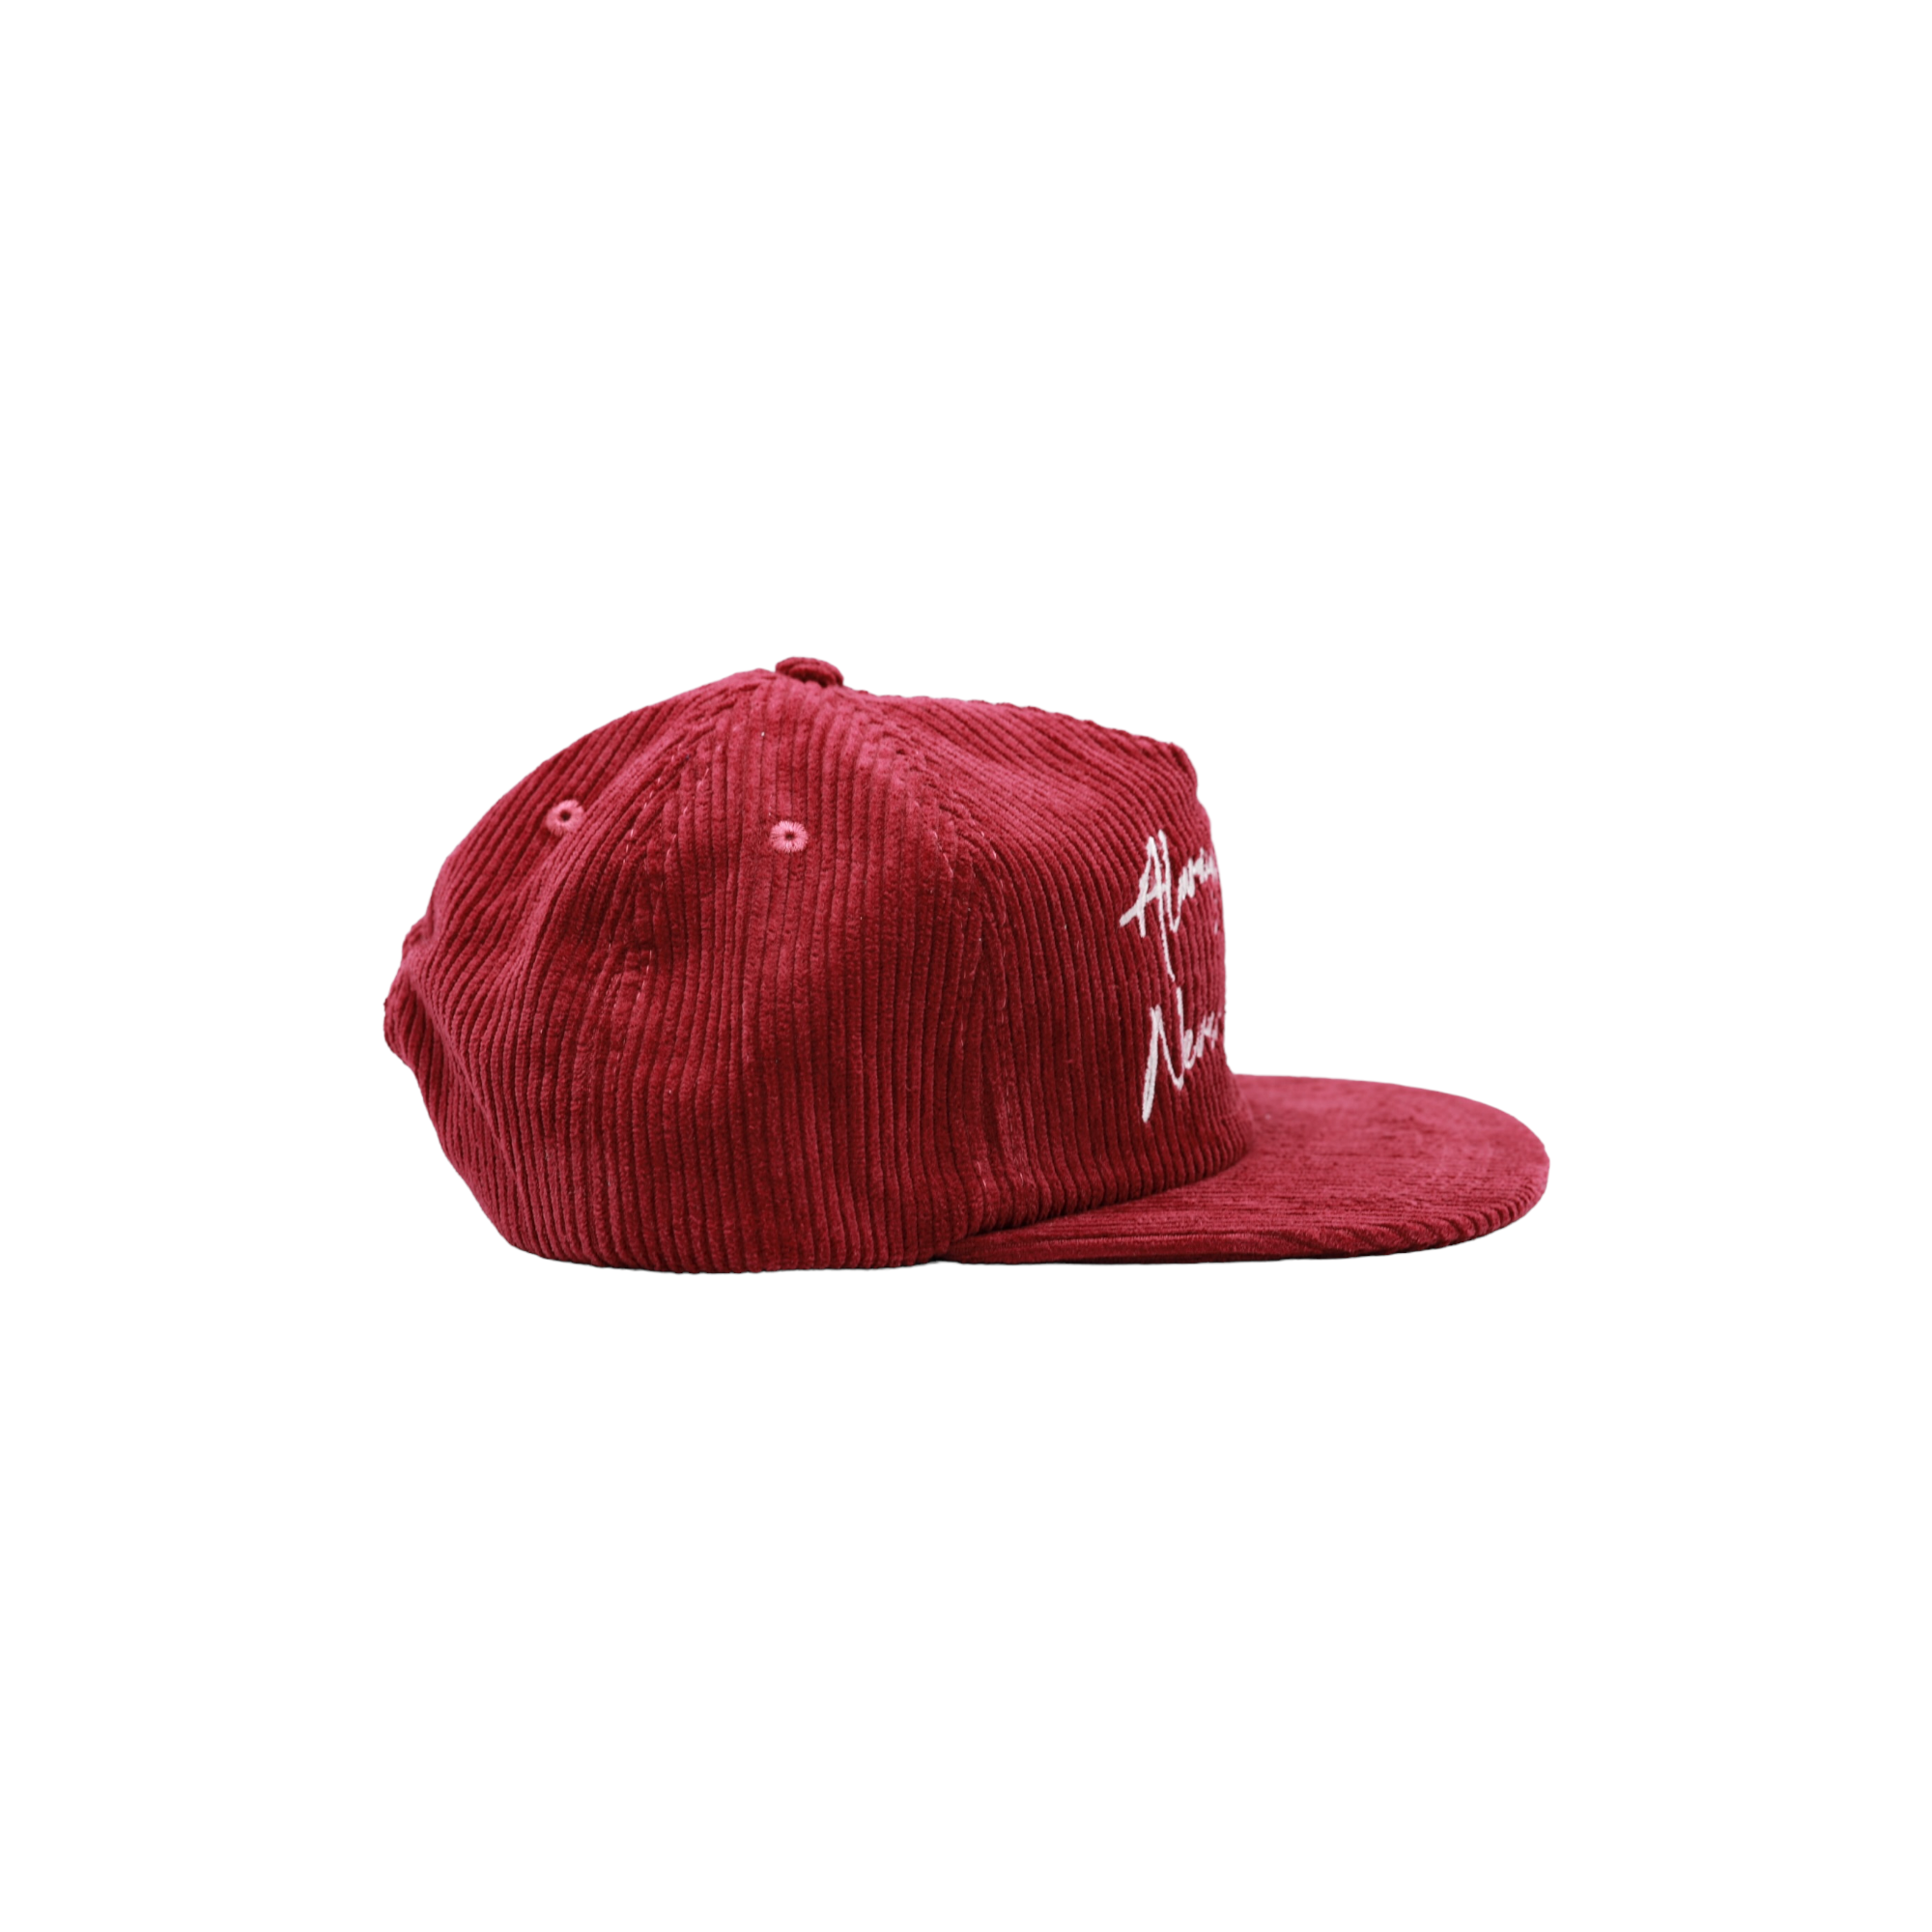 Never – Always Us, PericoLimited - Them Corduroy Burgundy Painters Cap